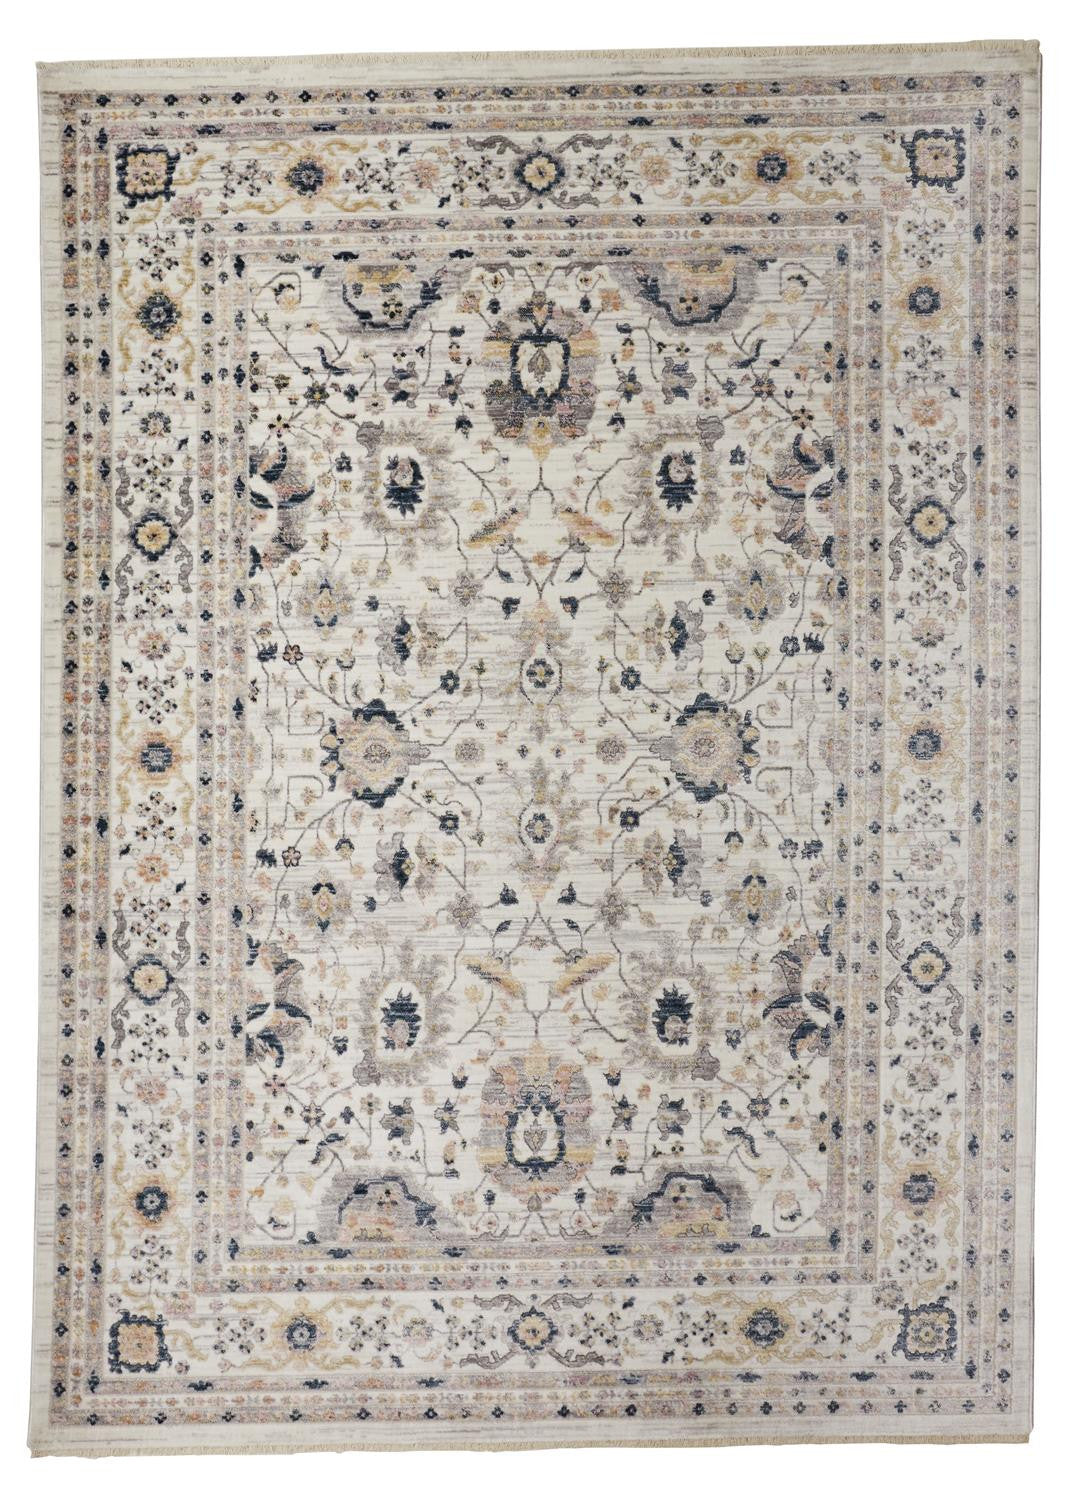 6' Tan Ivory And Blue Round Floral Stain Resistant Area Rug